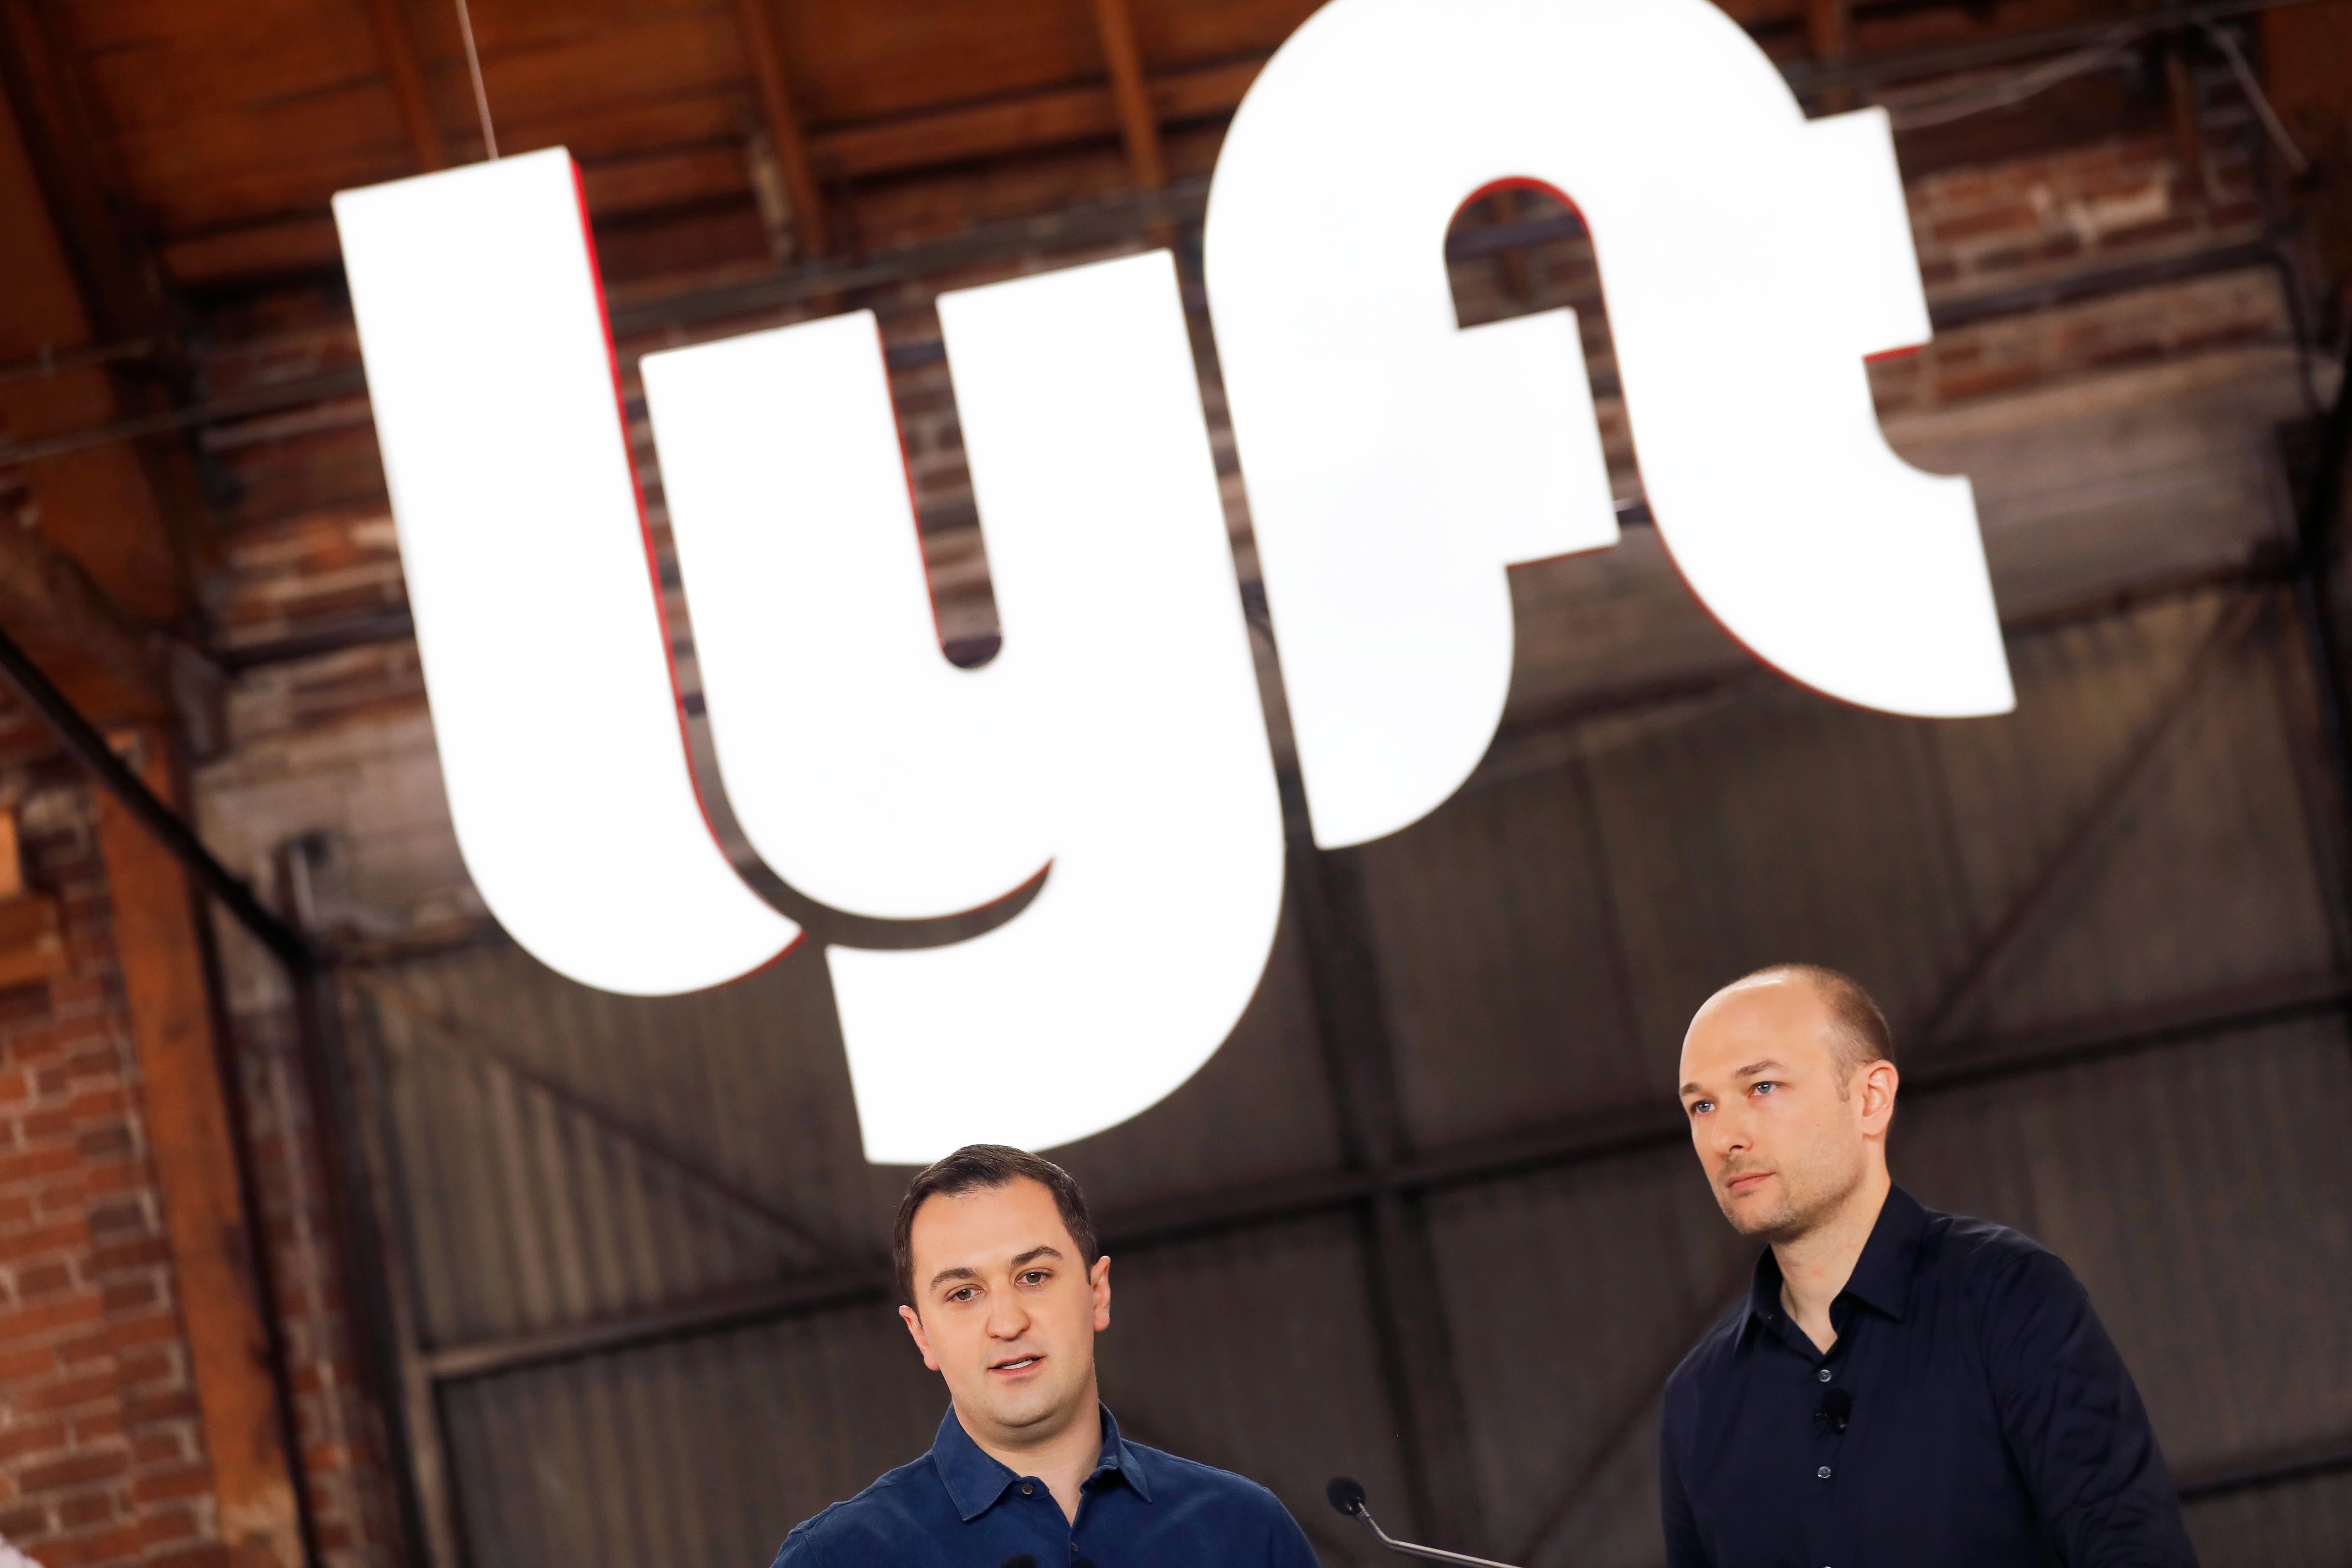 Lyft dips after lawsuit claims the company misled investors in its IPO prospectus